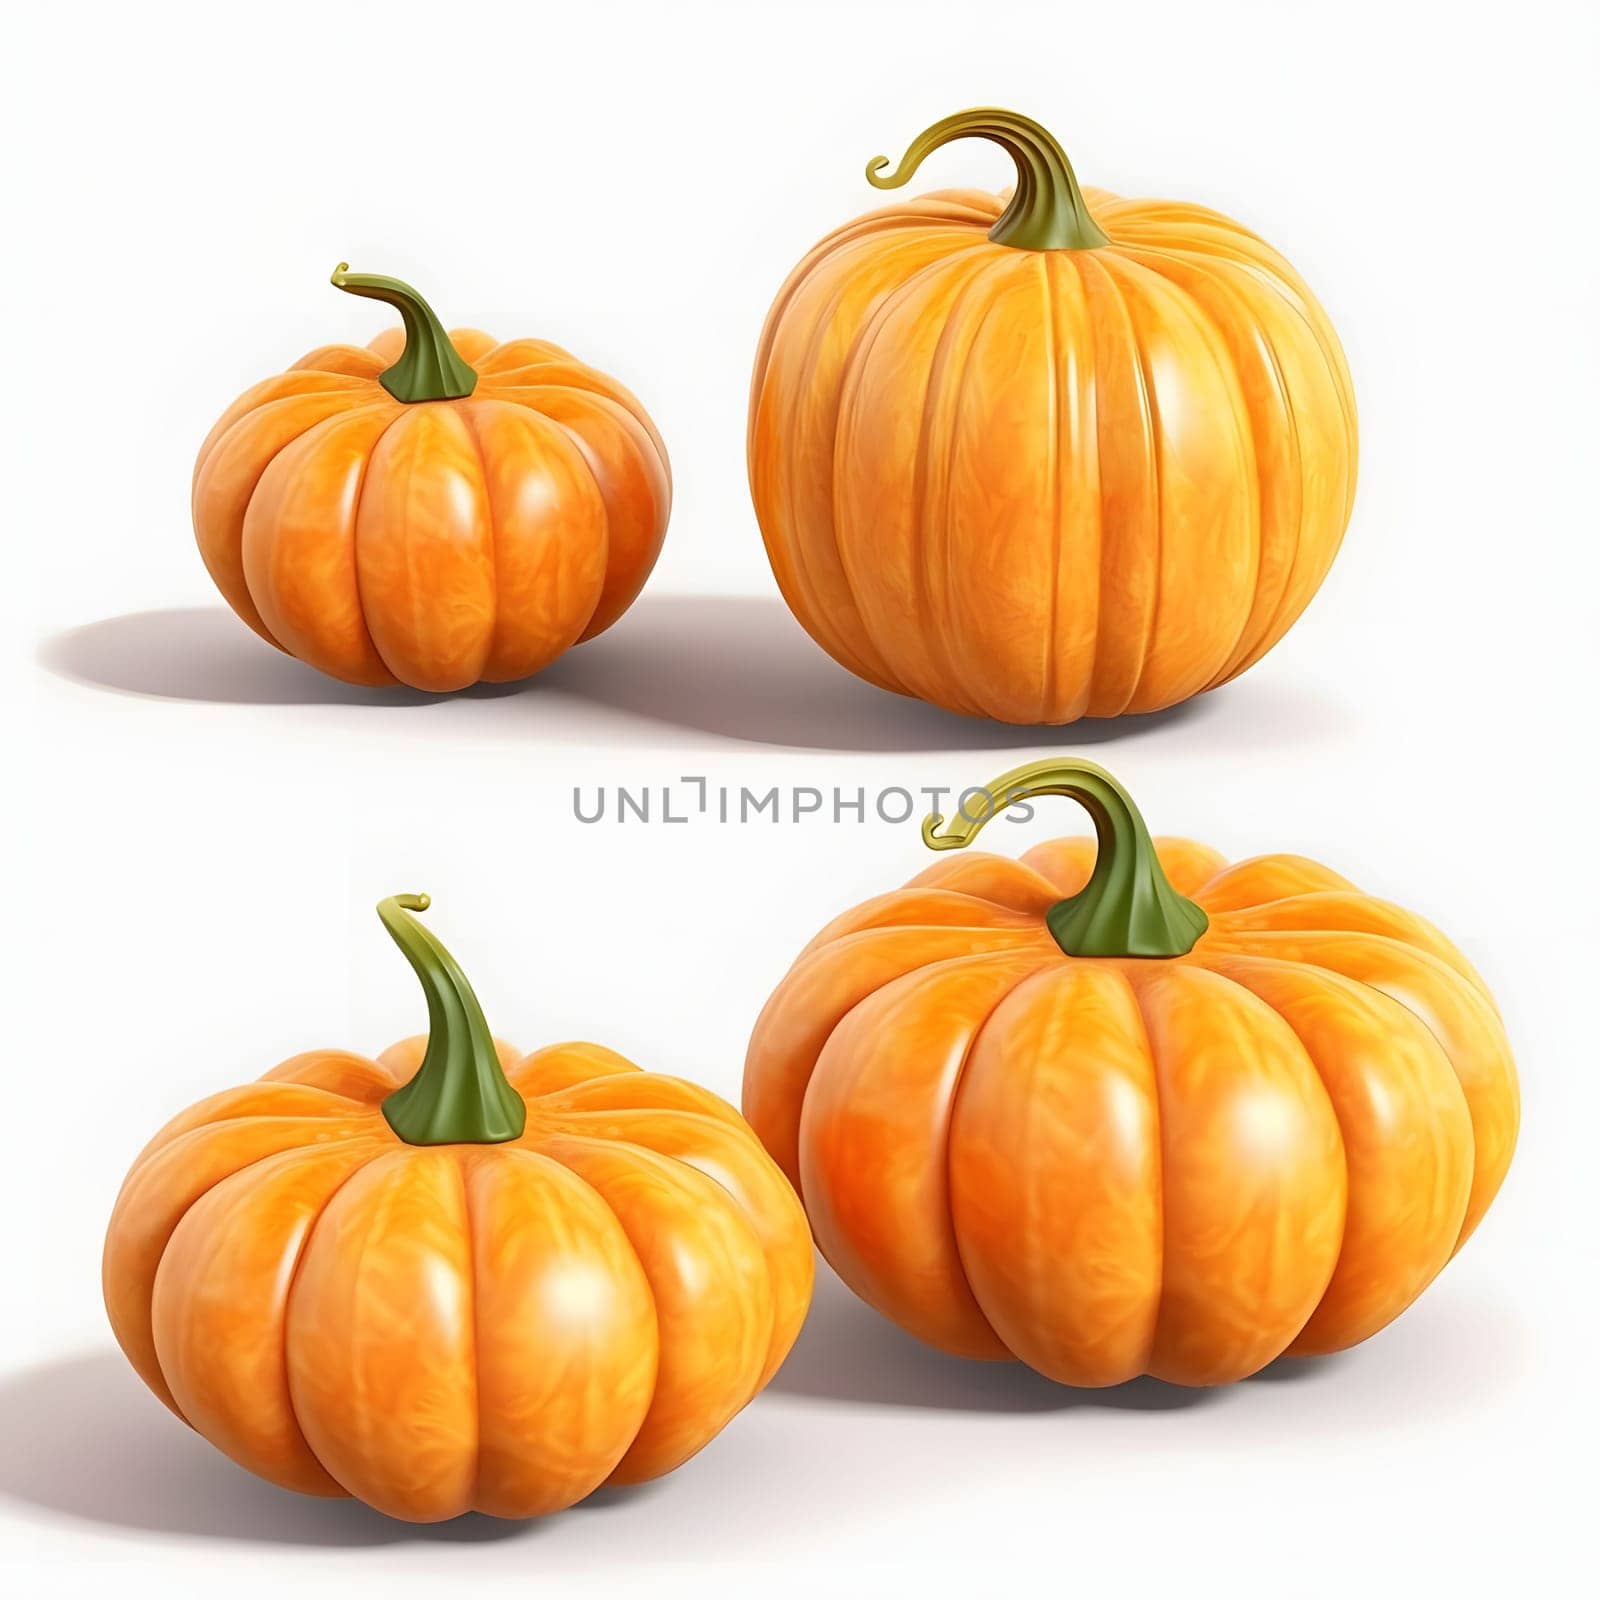 Four pumpkins. Pumpkin as a dish of thanksgiving for the harvest, picture on a white isolated background. Atmosphere of joy and celebration.